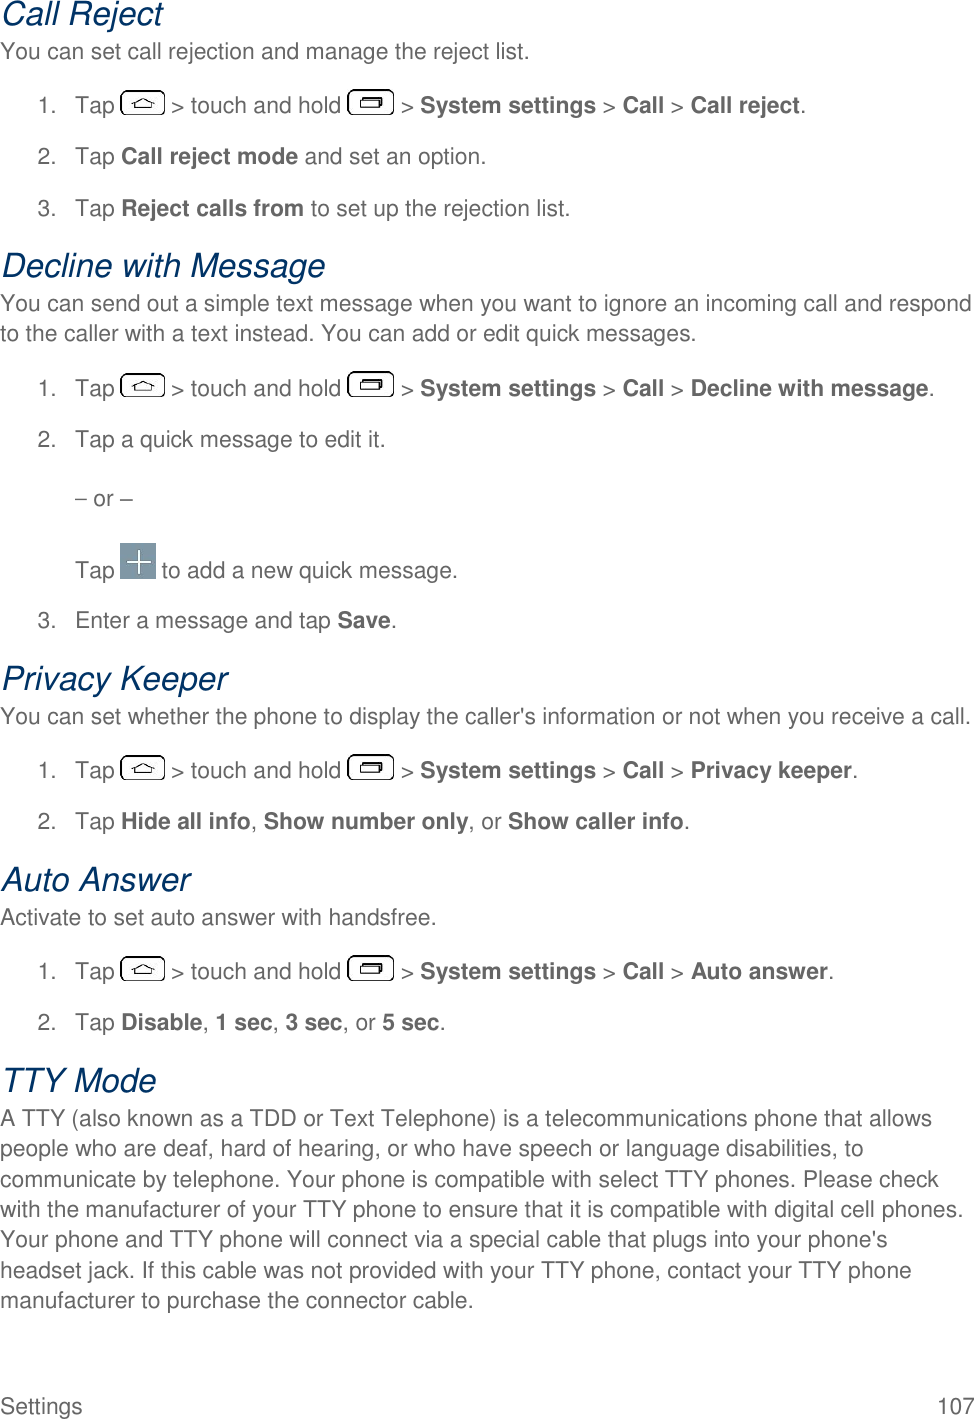  Settings  107 Call Reject You can set call rejection and manage the reject list. 1.  Tap   &gt; touch and hold   &gt; System settings &gt; Call &gt; Call reject. 2.  Tap Call reject mode and set an option. 3.  Tap Reject calls from to set up the rejection list. Decline with Message You can send out a simple text message when you want to ignore an incoming call and respond to the caller with a text instead. You can add or edit quick messages. 1.  Tap   &gt; touch and hold   &gt; System settings &gt; Call &gt; Decline with message. 2.  Tap a quick message to edit it. – or – Tap   to add a new quick message. 3.  Enter a message and tap Save. Privacy Keeper You can set whether the phone to display the caller&apos;s information or not when you receive a call. 1.  Tap   &gt; touch and hold   &gt; System settings &gt; Call &gt; Privacy keeper. 2.  Tap Hide all info, Show number only, or Show caller info. Auto Answer Activate to set auto answer with handsfree. 1.  Tap   &gt; touch and hold   &gt; System settings &gt; Call &gt; Auto answer. 2.  Tap Disable, 1 sec, 3 sec, or 5 sec. TTY Mode A TTY (also known as a TDD or Text Telephone) is a telecommunications phone that allows people who are deaf, hard of hearing, or who have speech or language disabilities, to communicate by telephone. Your phone is compatible with select TTY phones. Please check with the manufacturer of your TTY phone to ensure that it is compatible with digital cell phones. Your phone and TTY phone will connect via a special cable that plugs into your phone&apos;s headset jack. If this cable was not provided with your TTY phone, contact your TTY phone manufacturer to purchase the connector cable. 